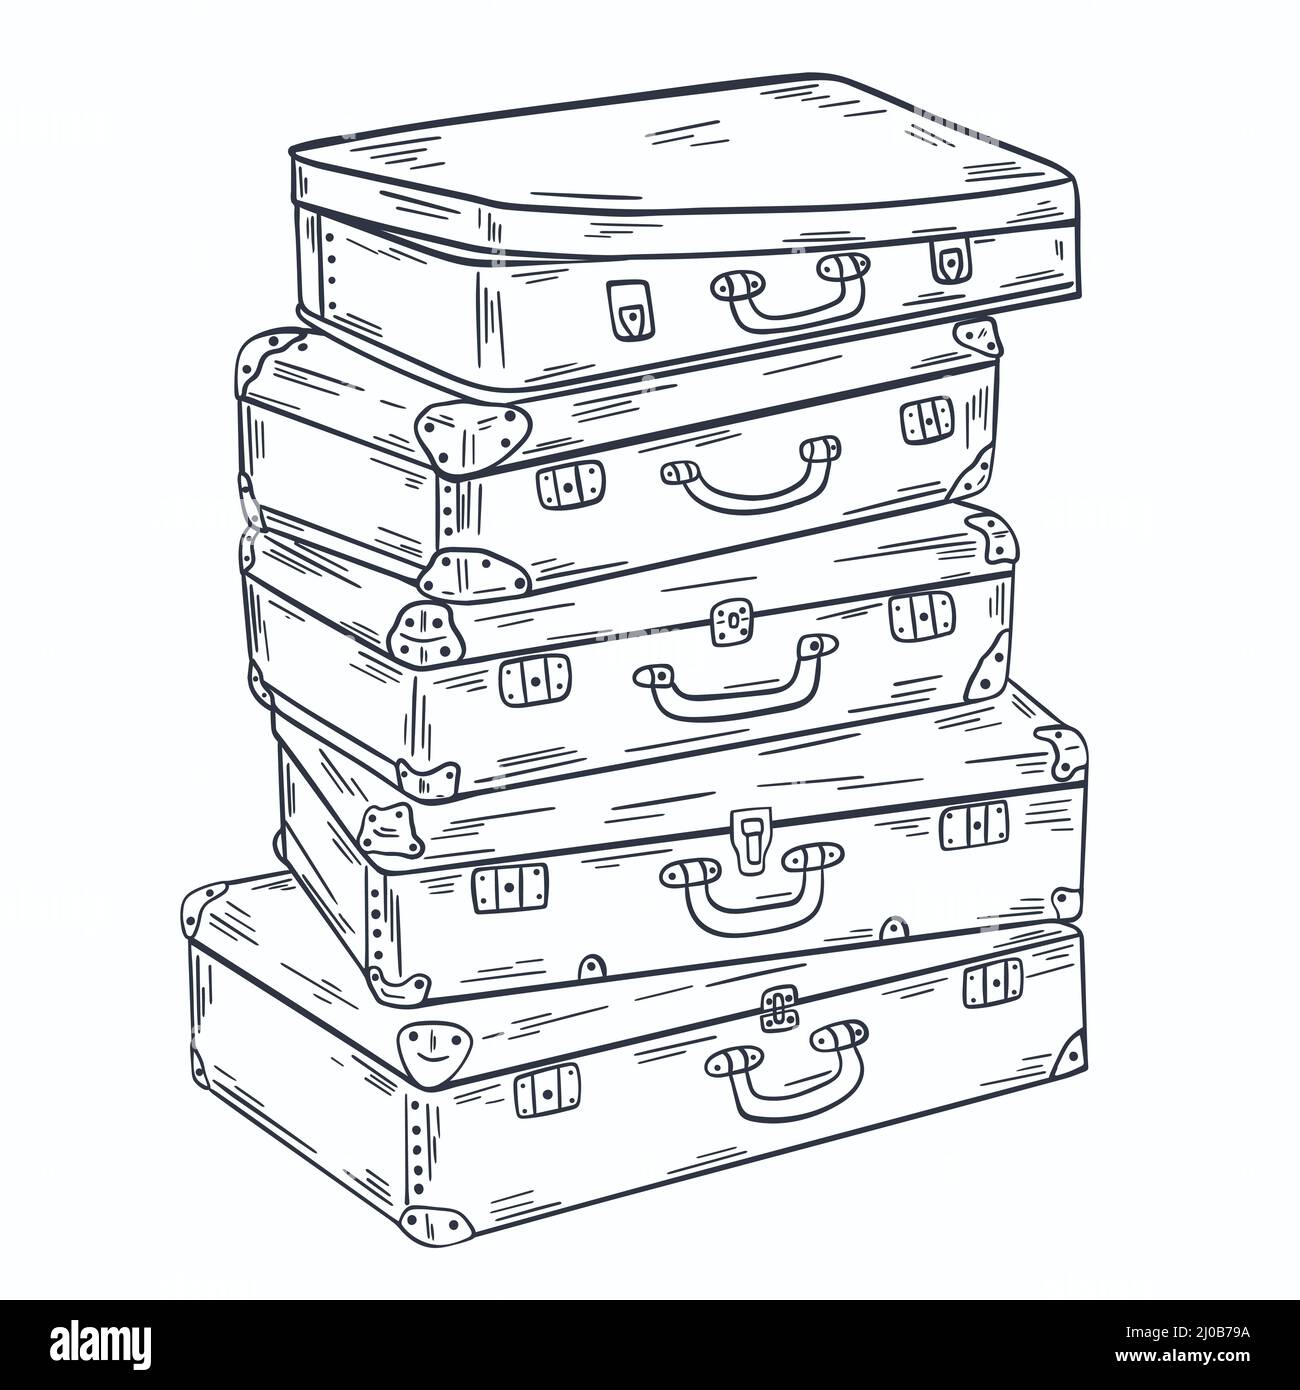 Group suitcases stacked on top of each other sketch. Luggage hand engraved. Old vintage bags for carrying things vector black outline illustration Stock Vector